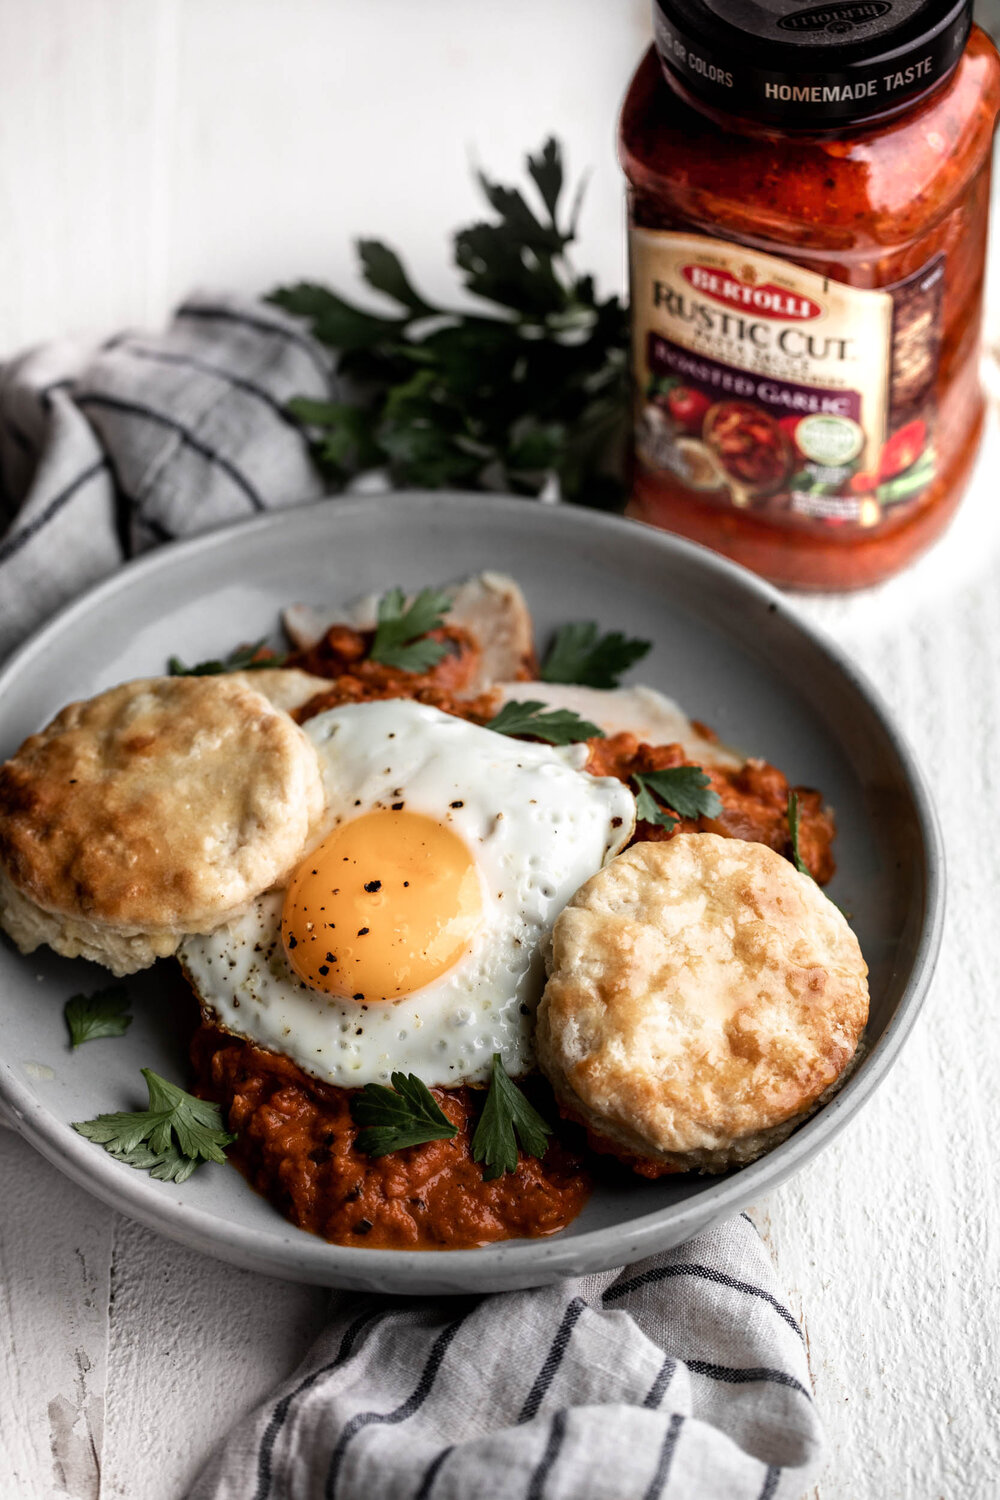 Bertolli Rustic Cut Brunch Buttermilk Biscuits with Turkey and Southern Tomato Gravy-4.jpg